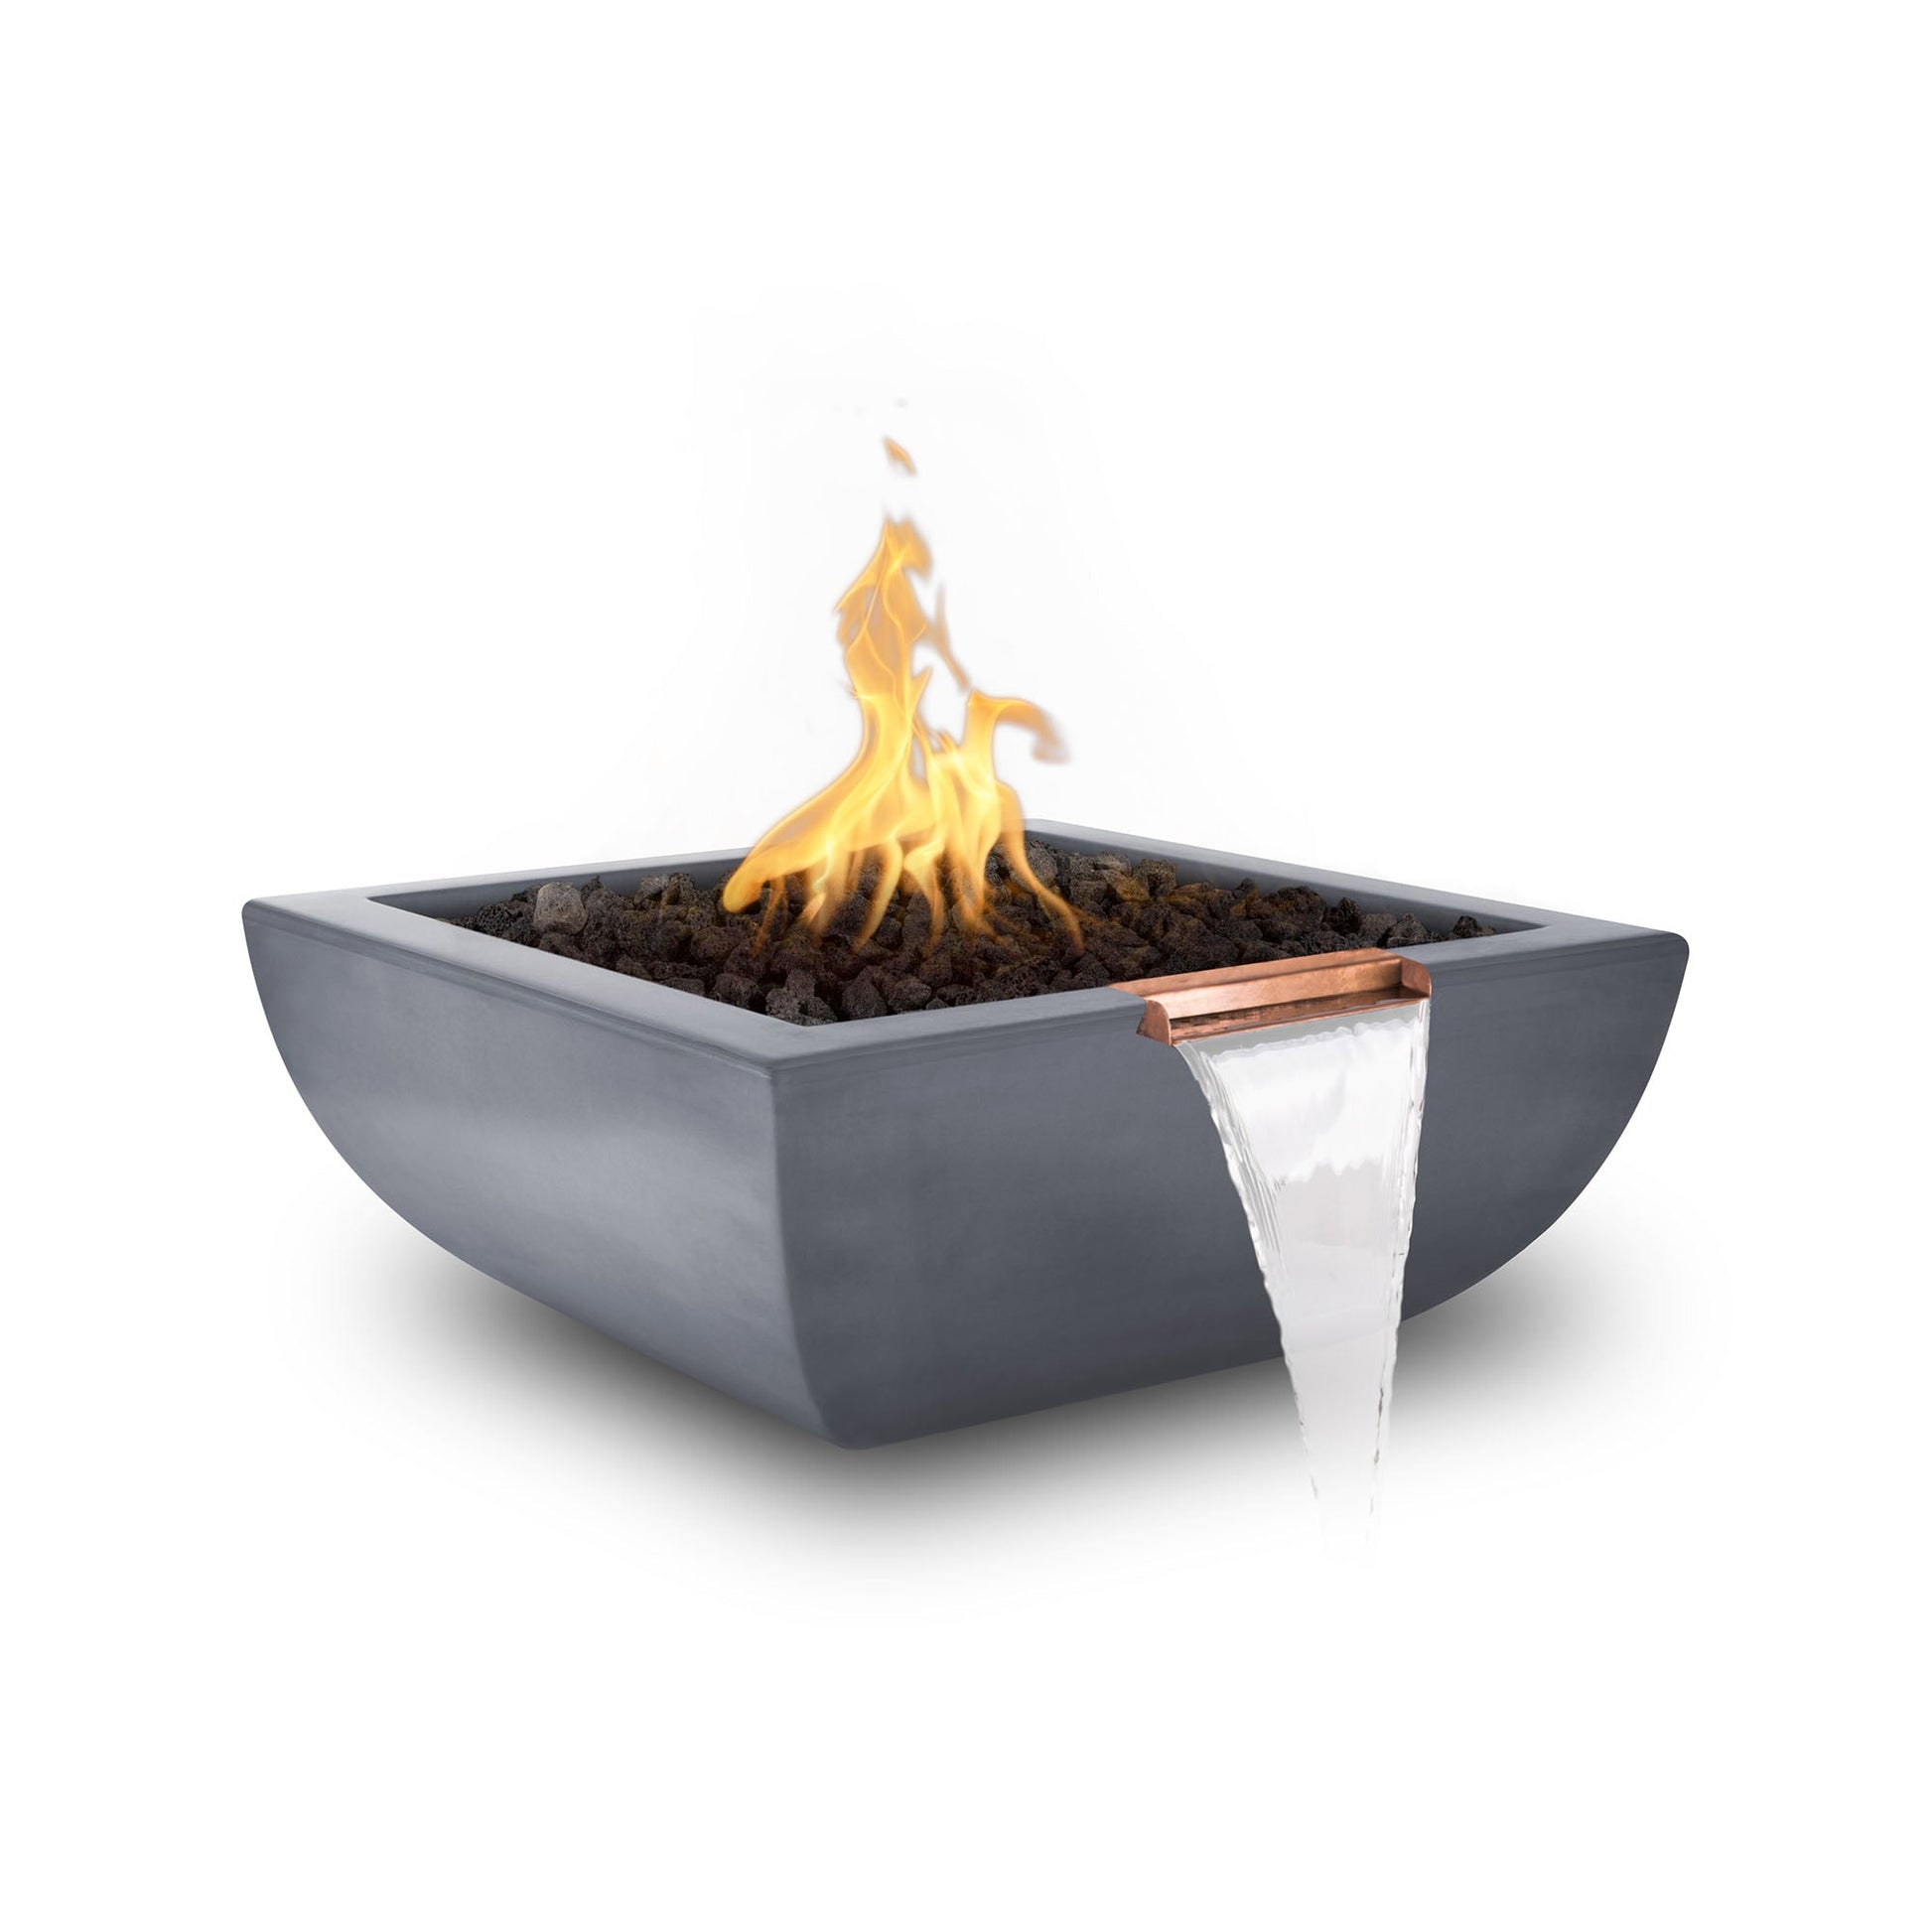 The Outdoor Plus Square Avalon 24" Rustic Gray GFRC Concrete Liquid Propane Fire & Water Bowl with Match Lit with Flame Sense Ignition